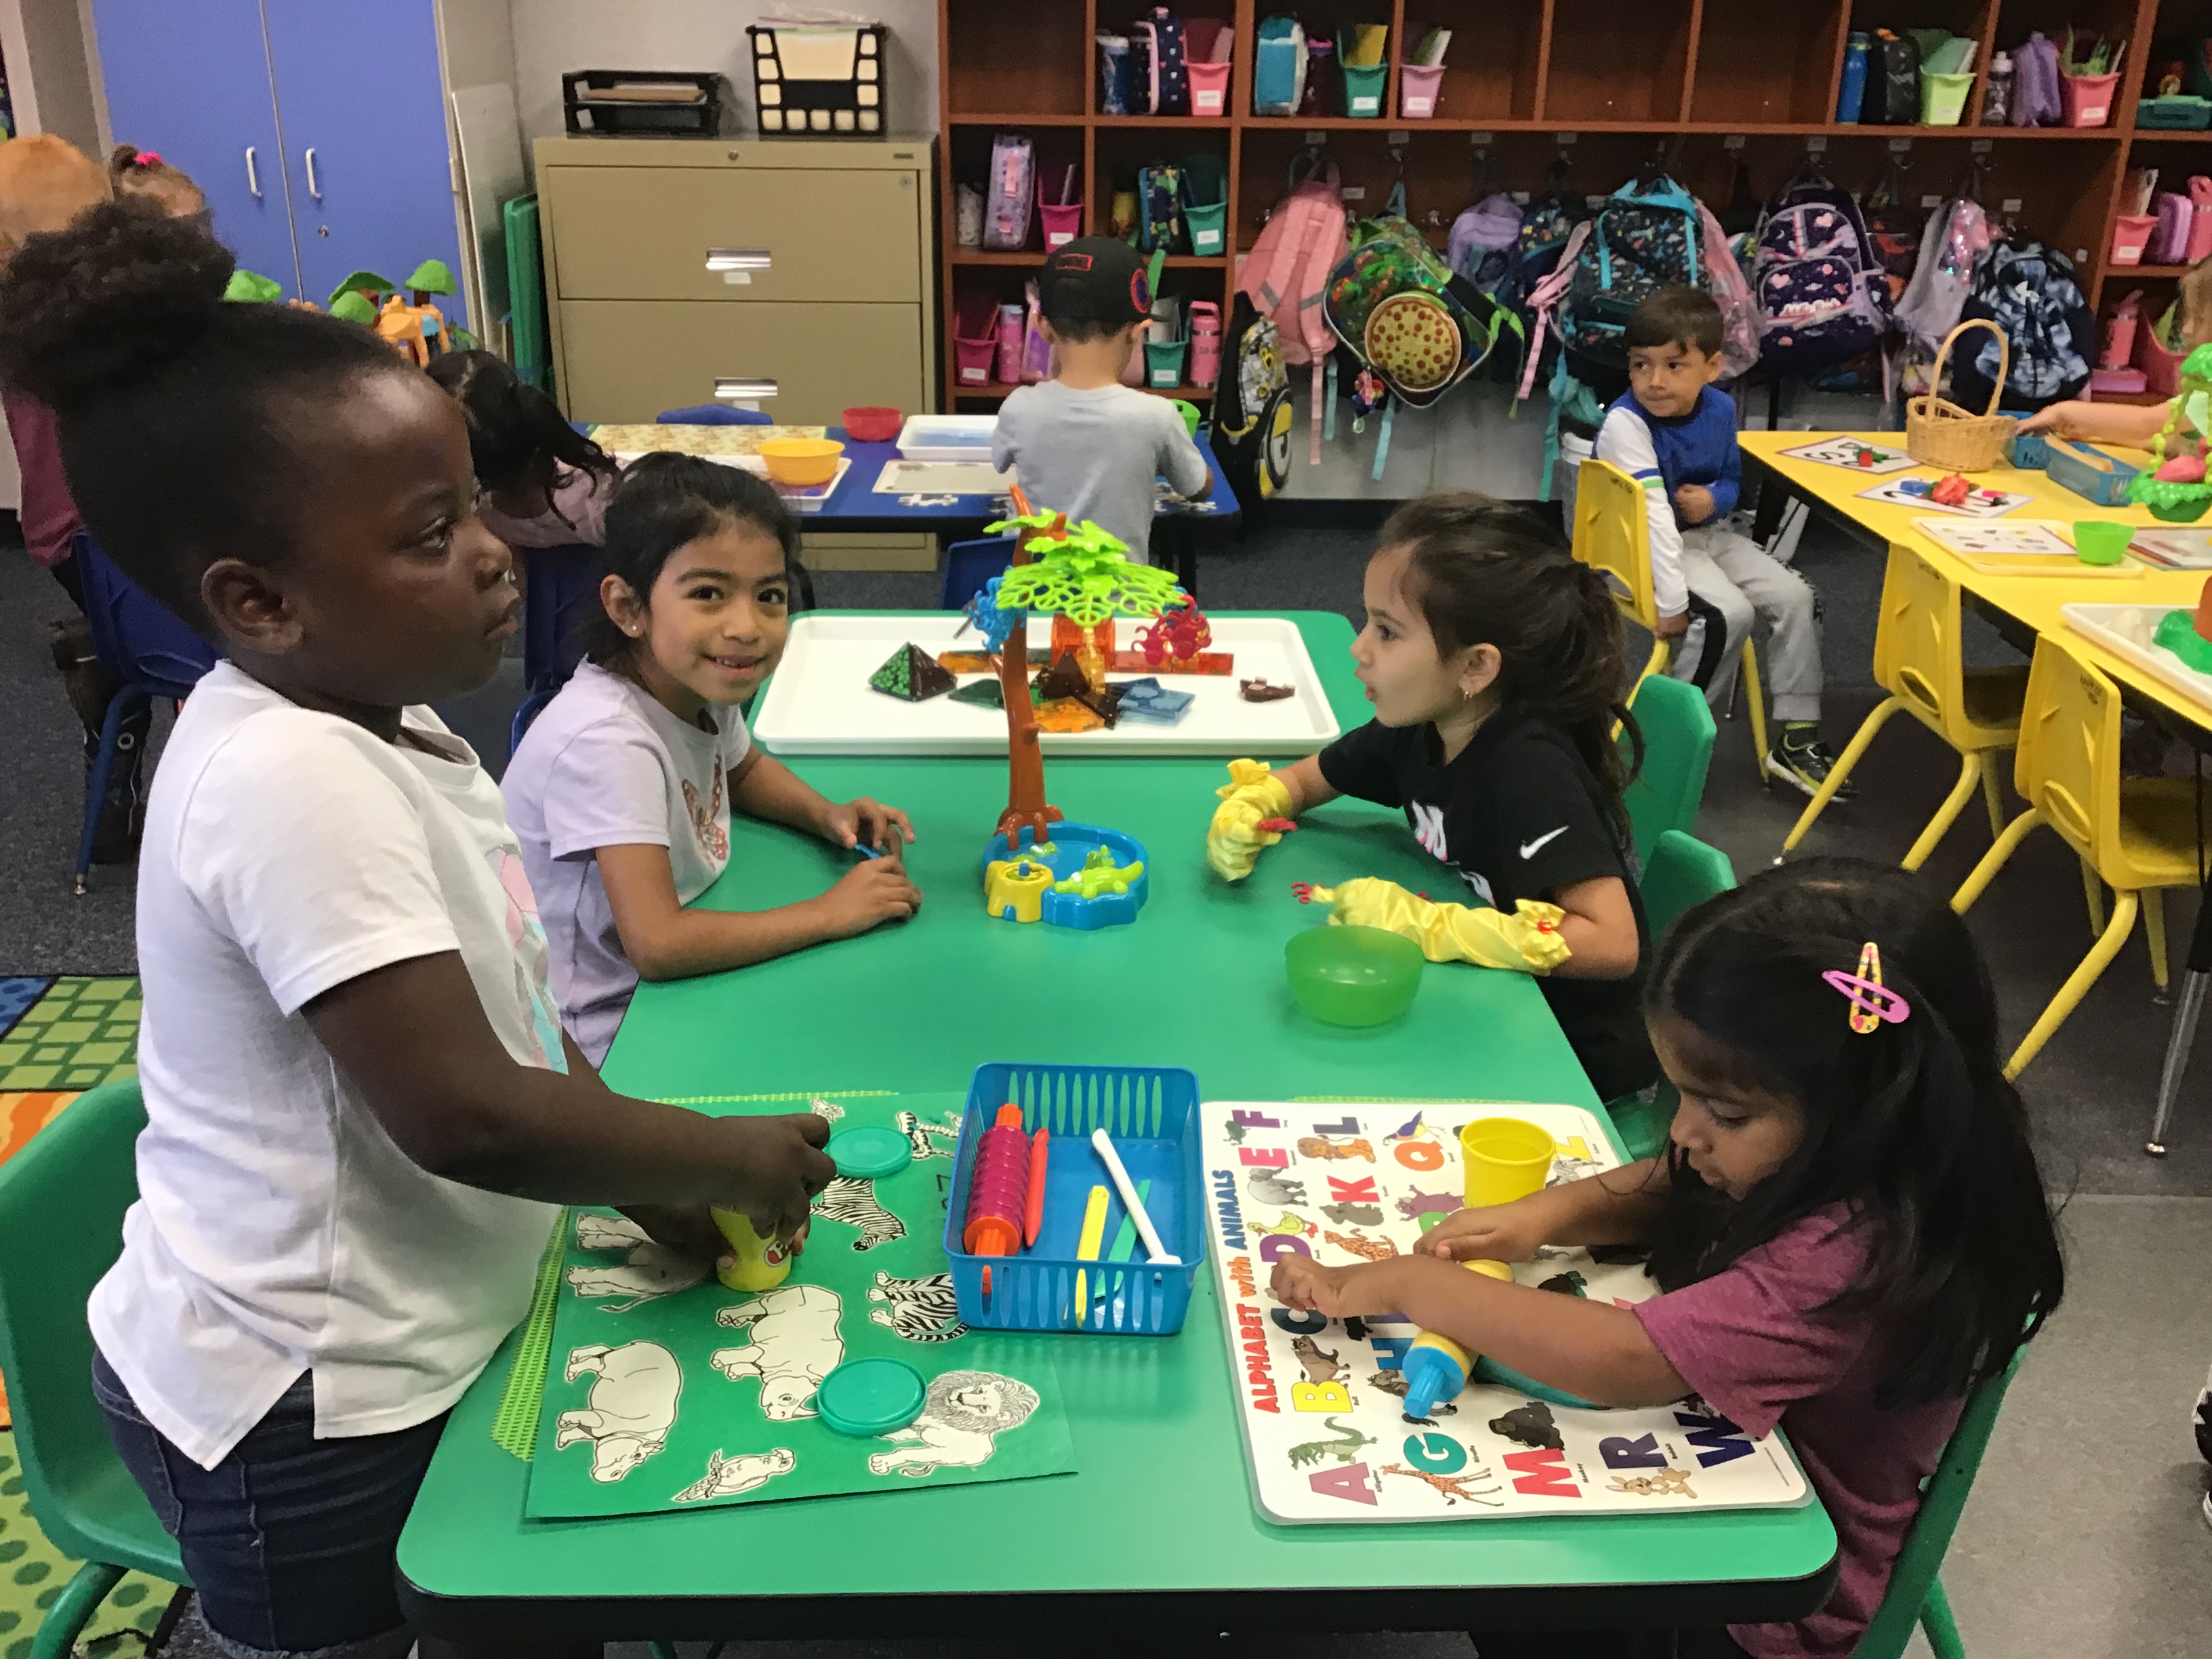 Students playing with play doh and two students playing a monkey board game.